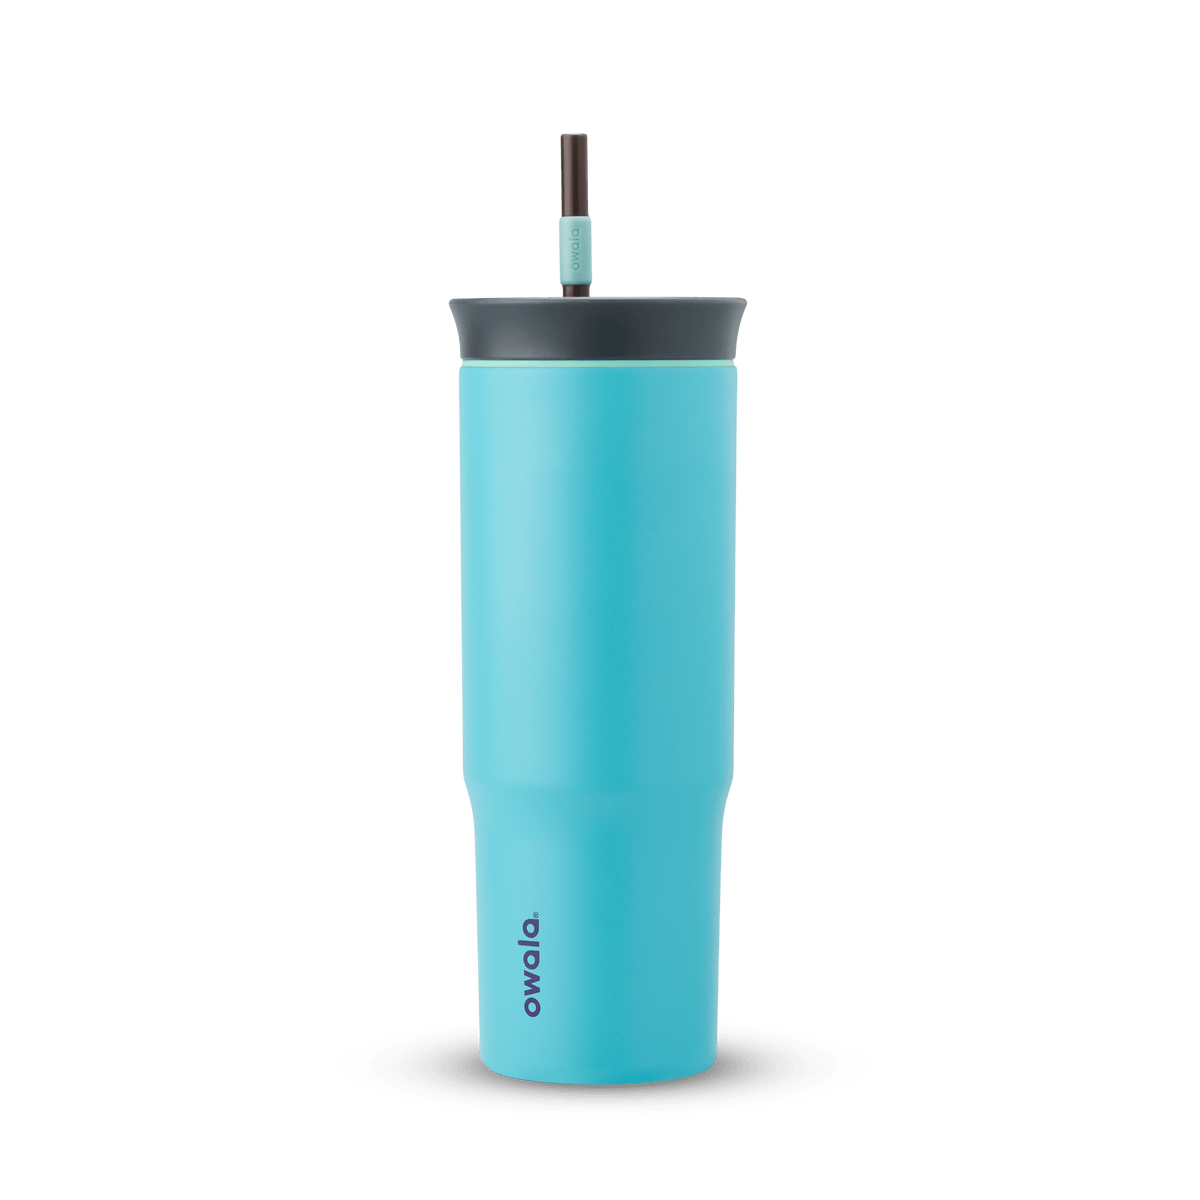 Owala FreeSip Stainless Steel Water Bottle / 24oz / Color: Candy Store